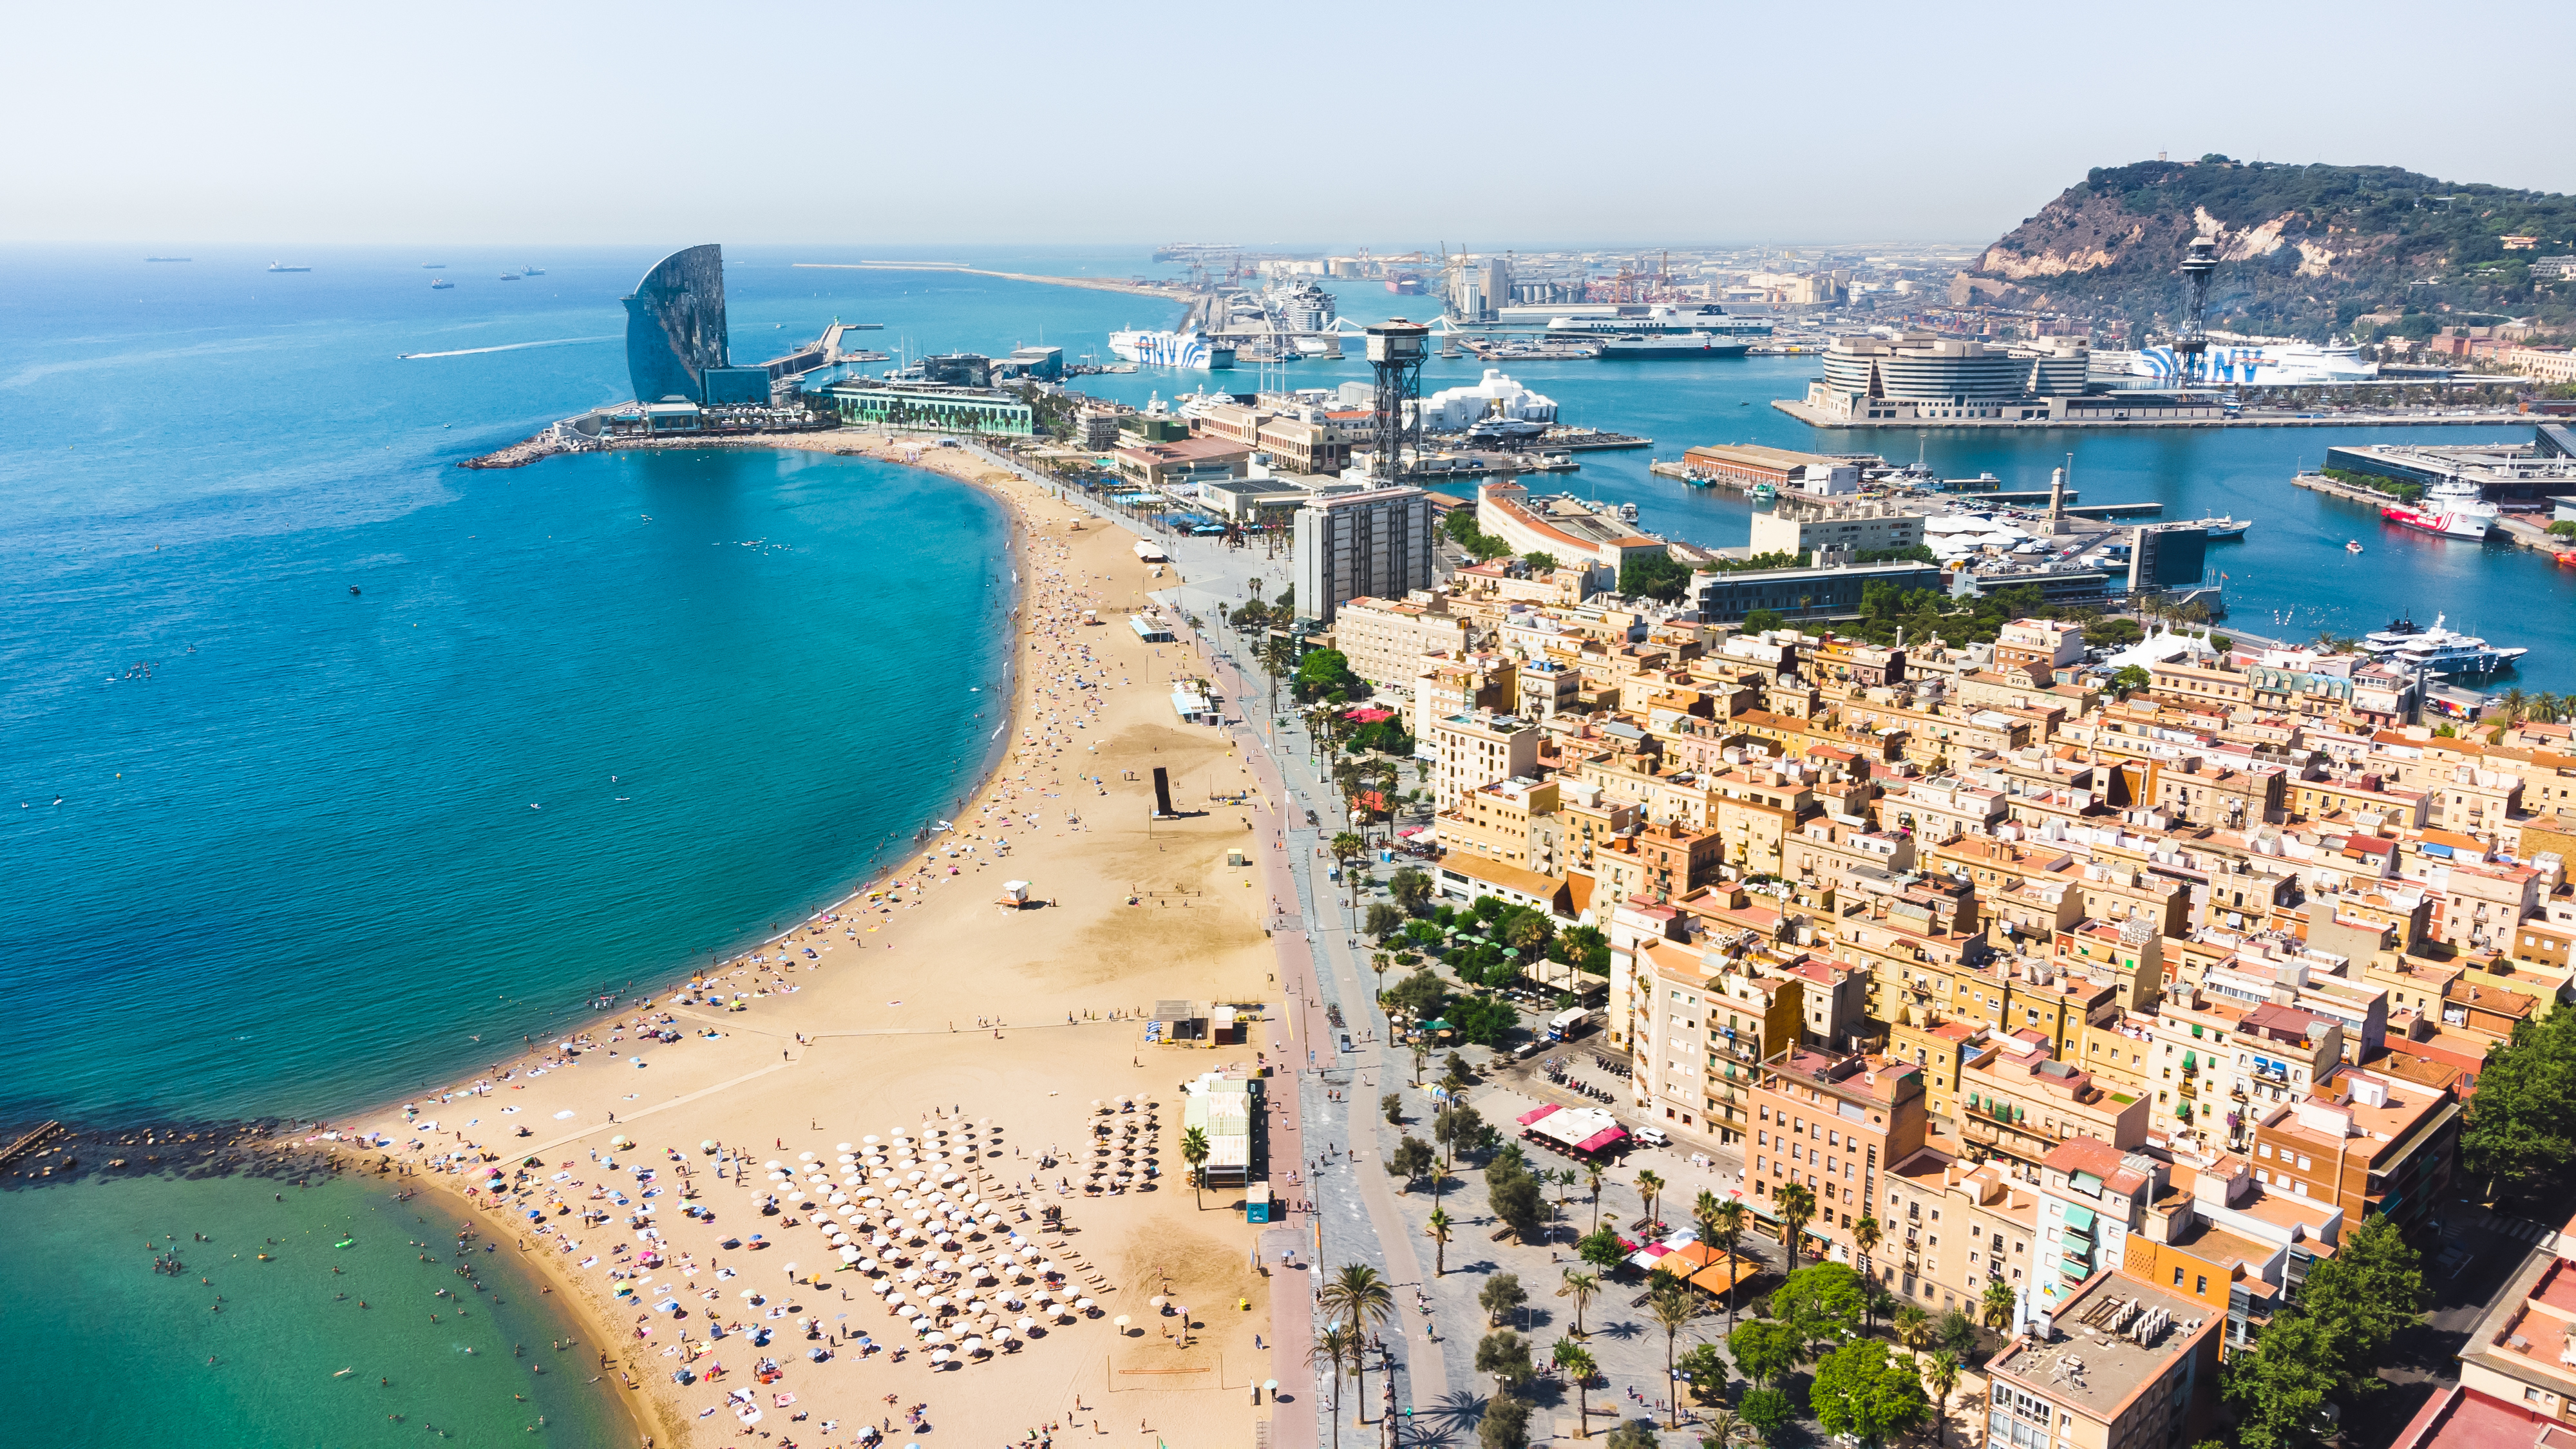 Flights between Spain and the UK can cost as little as £9.35